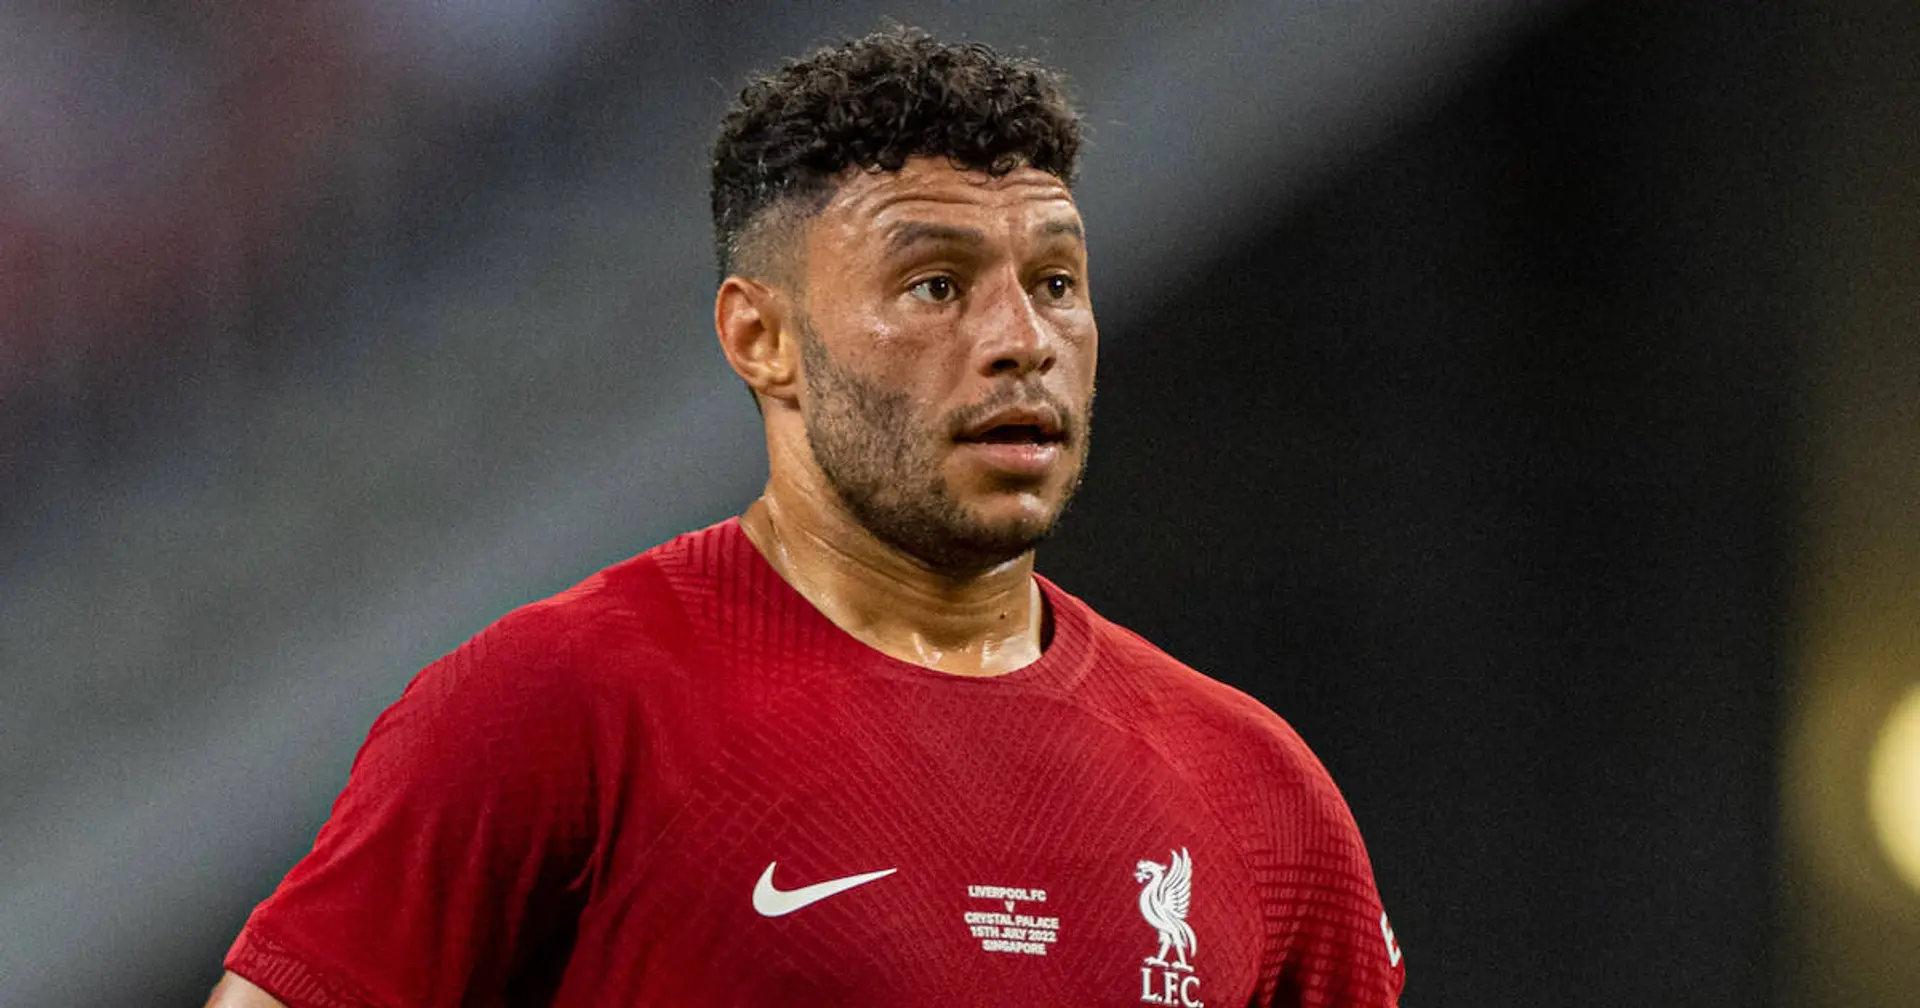 Oxlade-Chamberlain to leave Liverpool as free agent in 2023 - Fabrizio Romano (reliability: 5 stars)